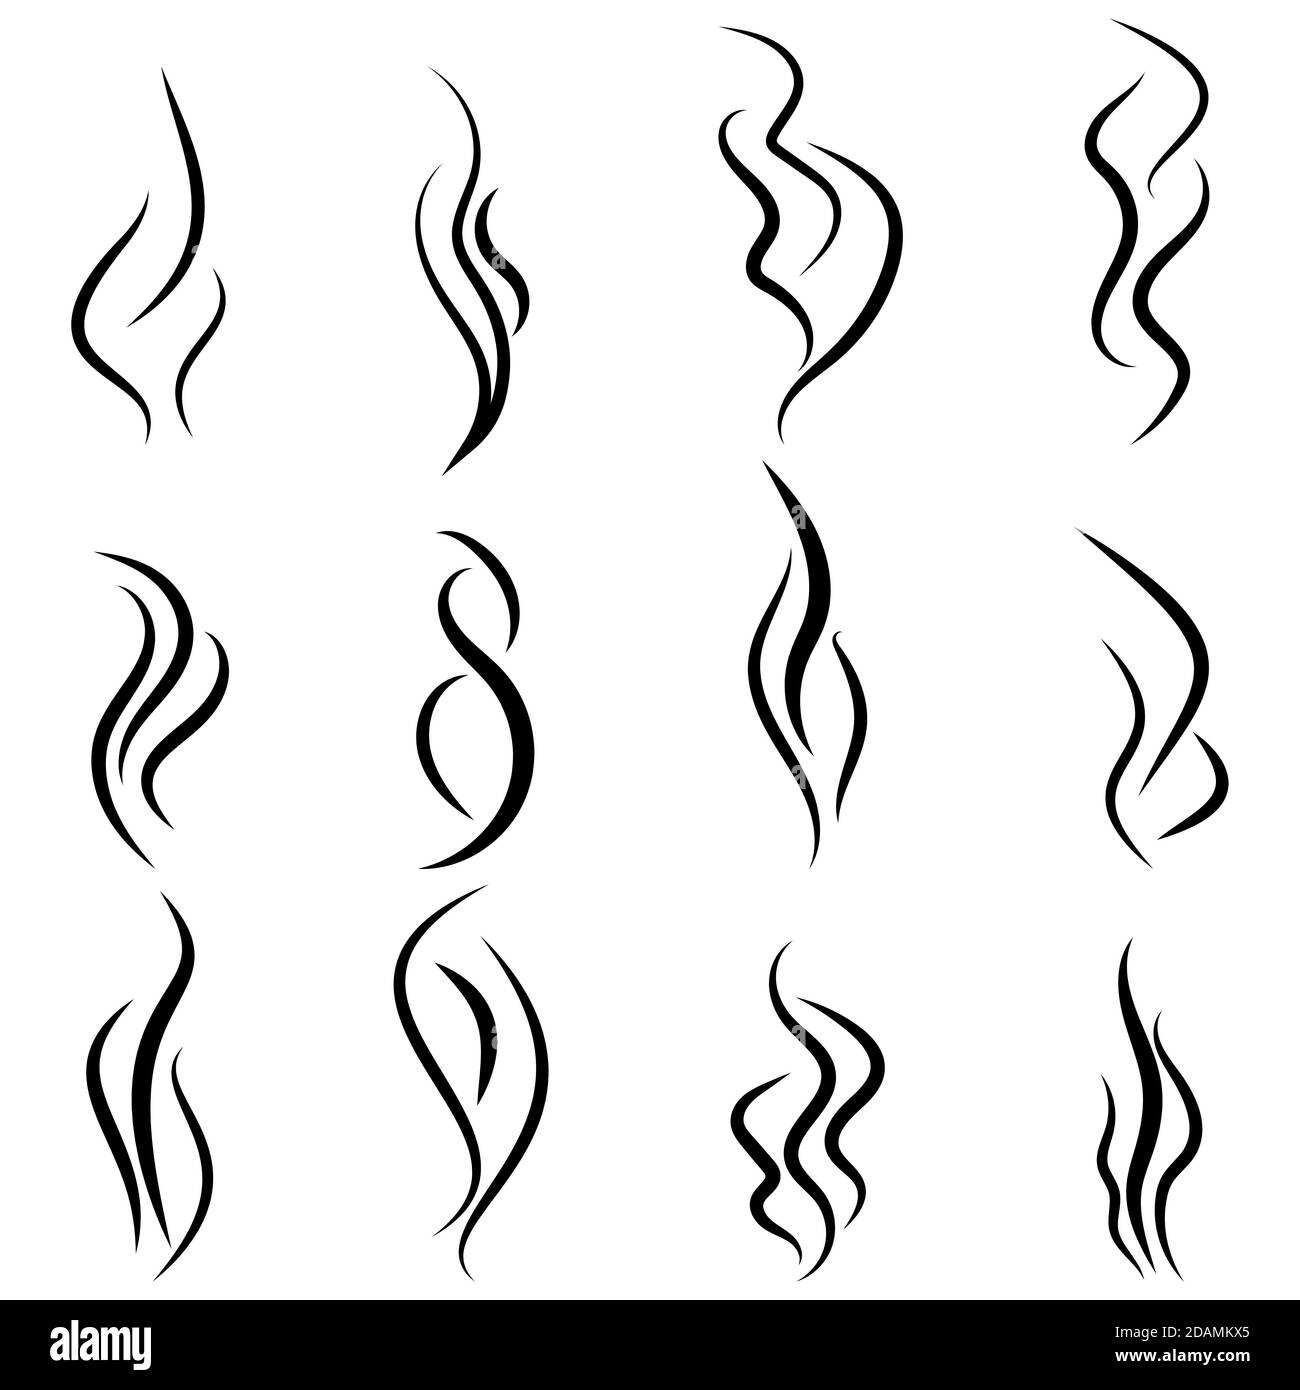 Smell symbols. Steam, cooking, aroma, smoke, vector icons. EPS 10 Stock Vector